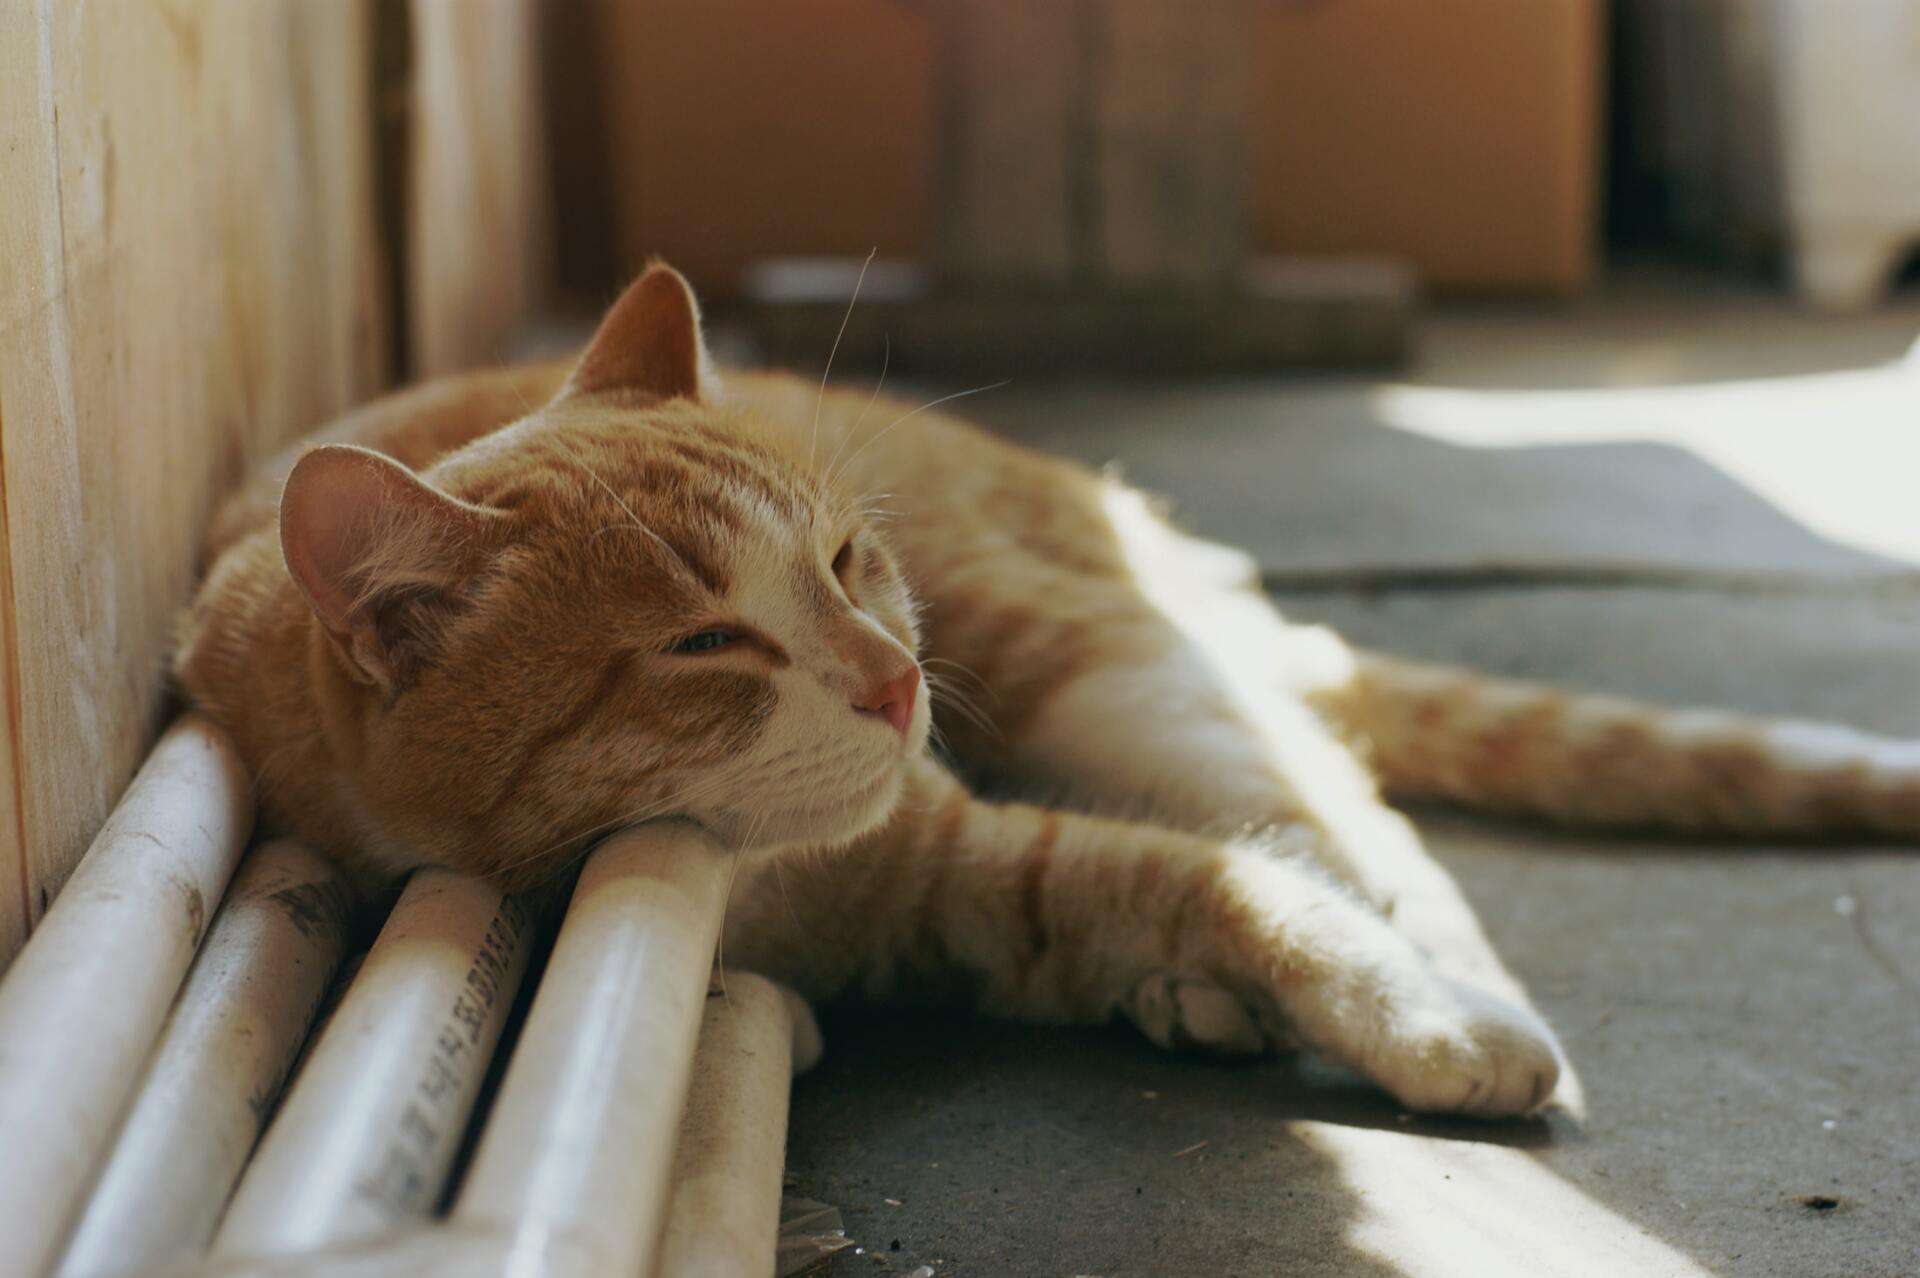 Why Do Cats Like to Sleep So Much?